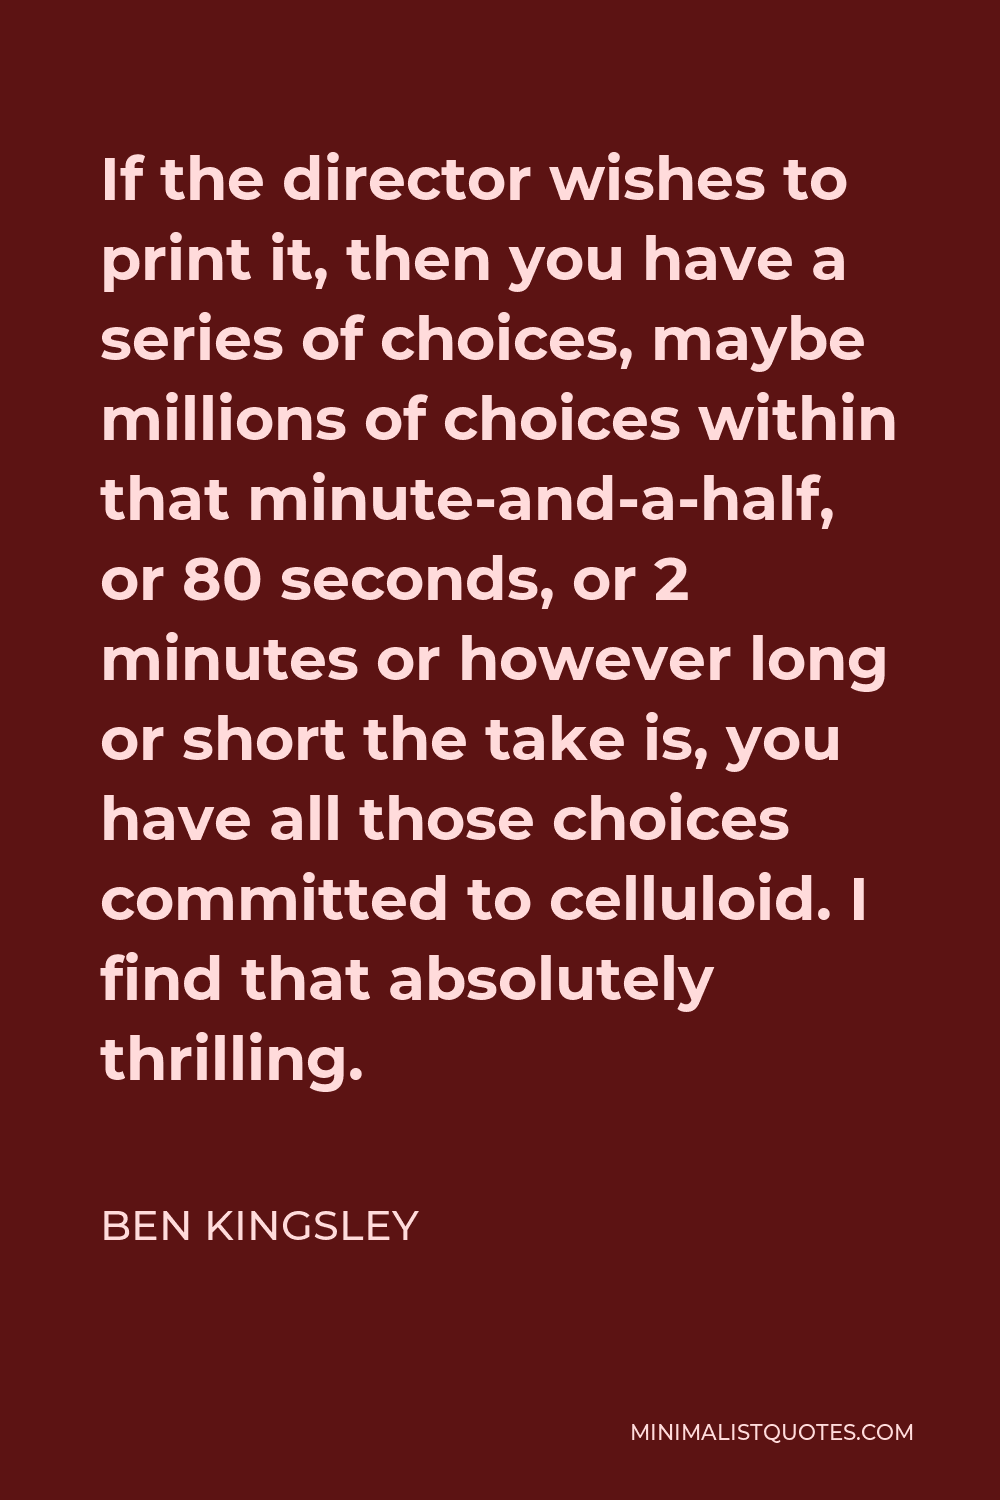 Ben Kingsley Quote - If the director wishes to print it, then you have a series of choices, maybe millions of choices within that minute-and-a-half, or 80 seconds, or 2 minutes or however long or short the take is, you have all those choices committed to celluloid. I find that absolutely thrilling.